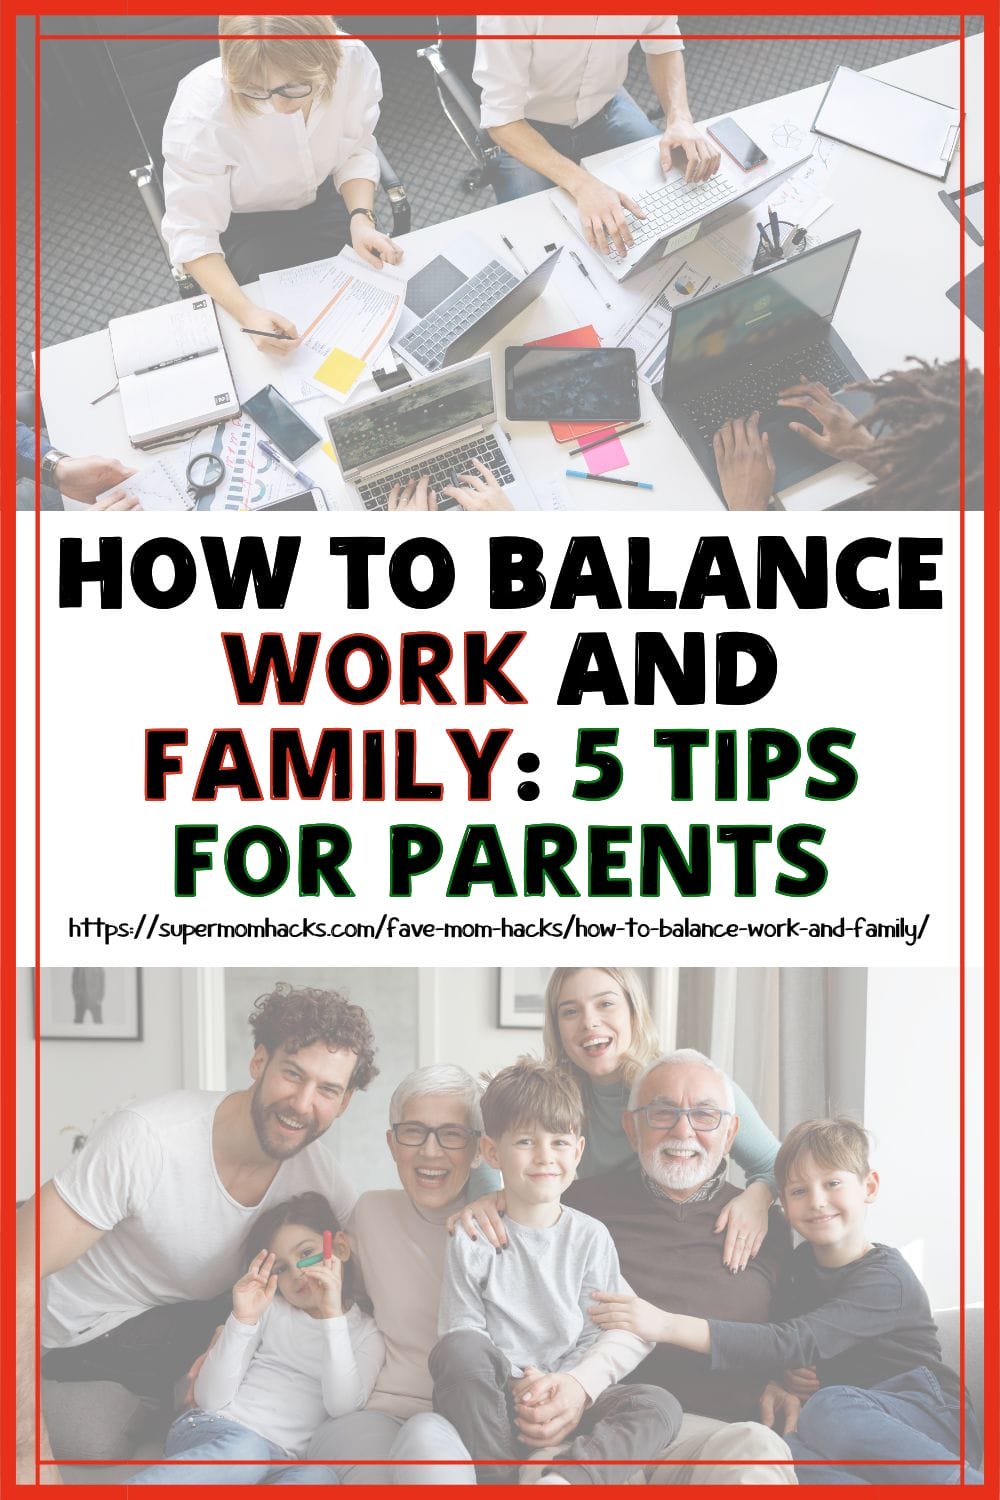 Knowing how to balance work and family as a busy parent isn't easy. These five tips will help parents with balancing work and family life.